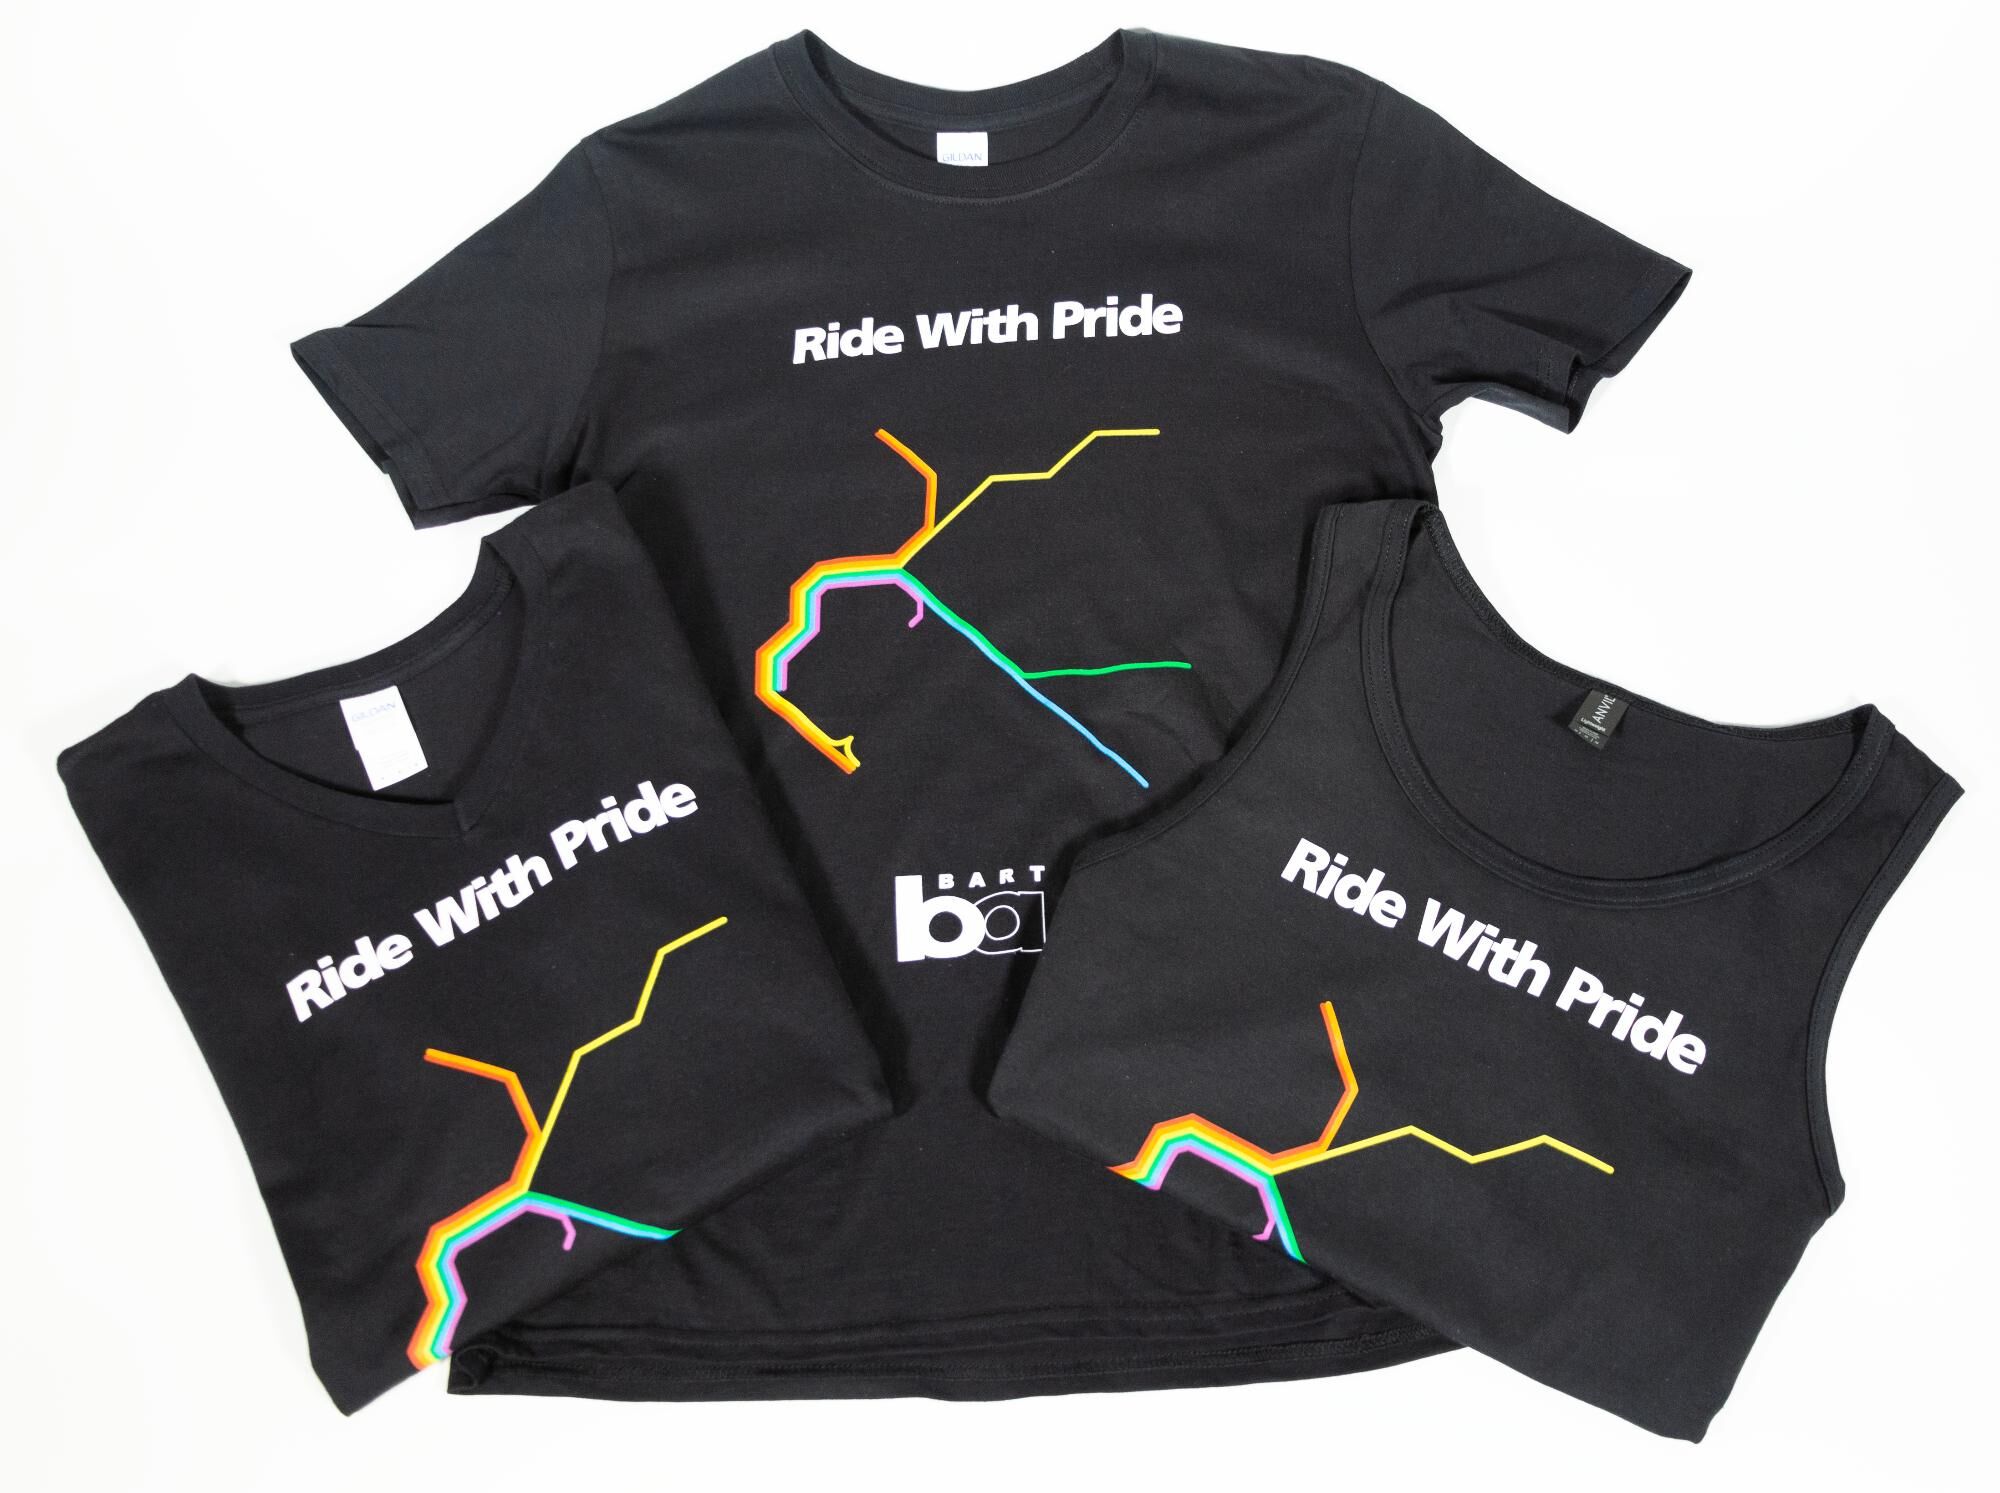 Ride with Pride shirts